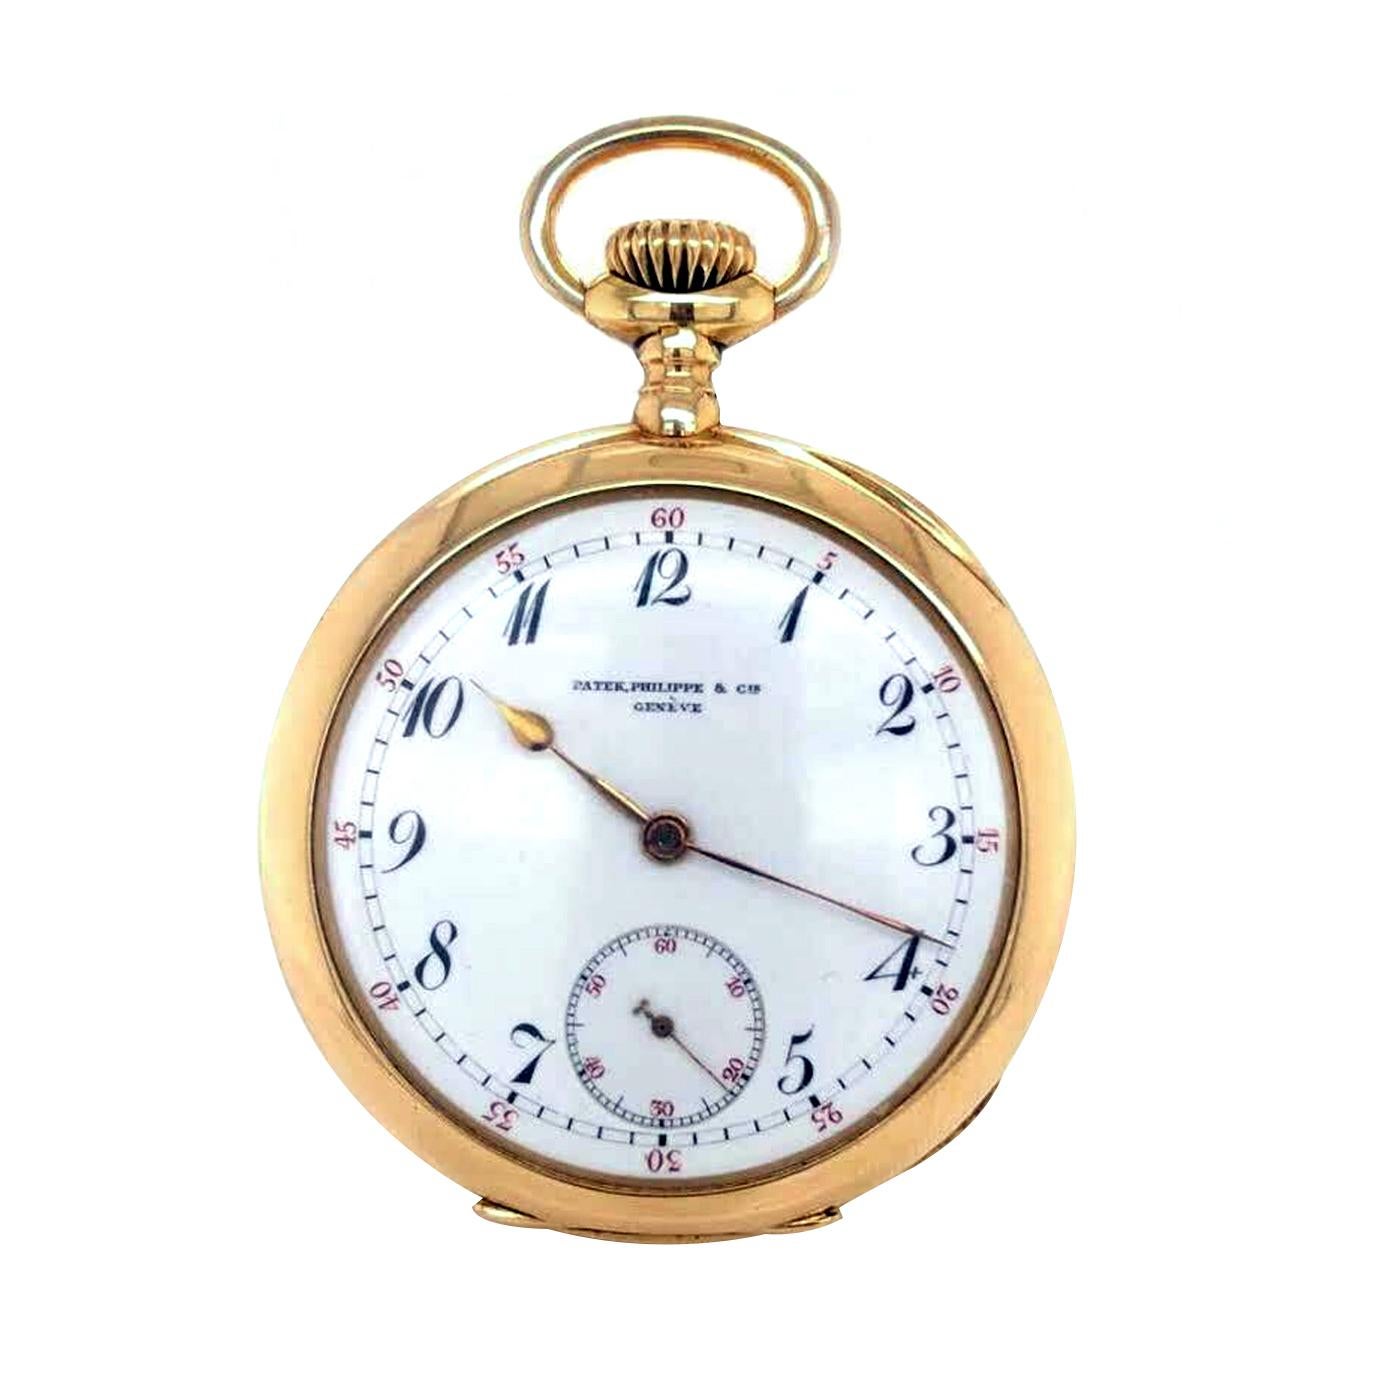 Patek Phillipe 18K Yellow Gold Pocket Watch Manual-wind movement, Guillaume balance, 18k yellow gold case, White enamel dial with black Breguet numerals, subsidiary seconds. There is a dust ring running from the inside edge of the band down to the